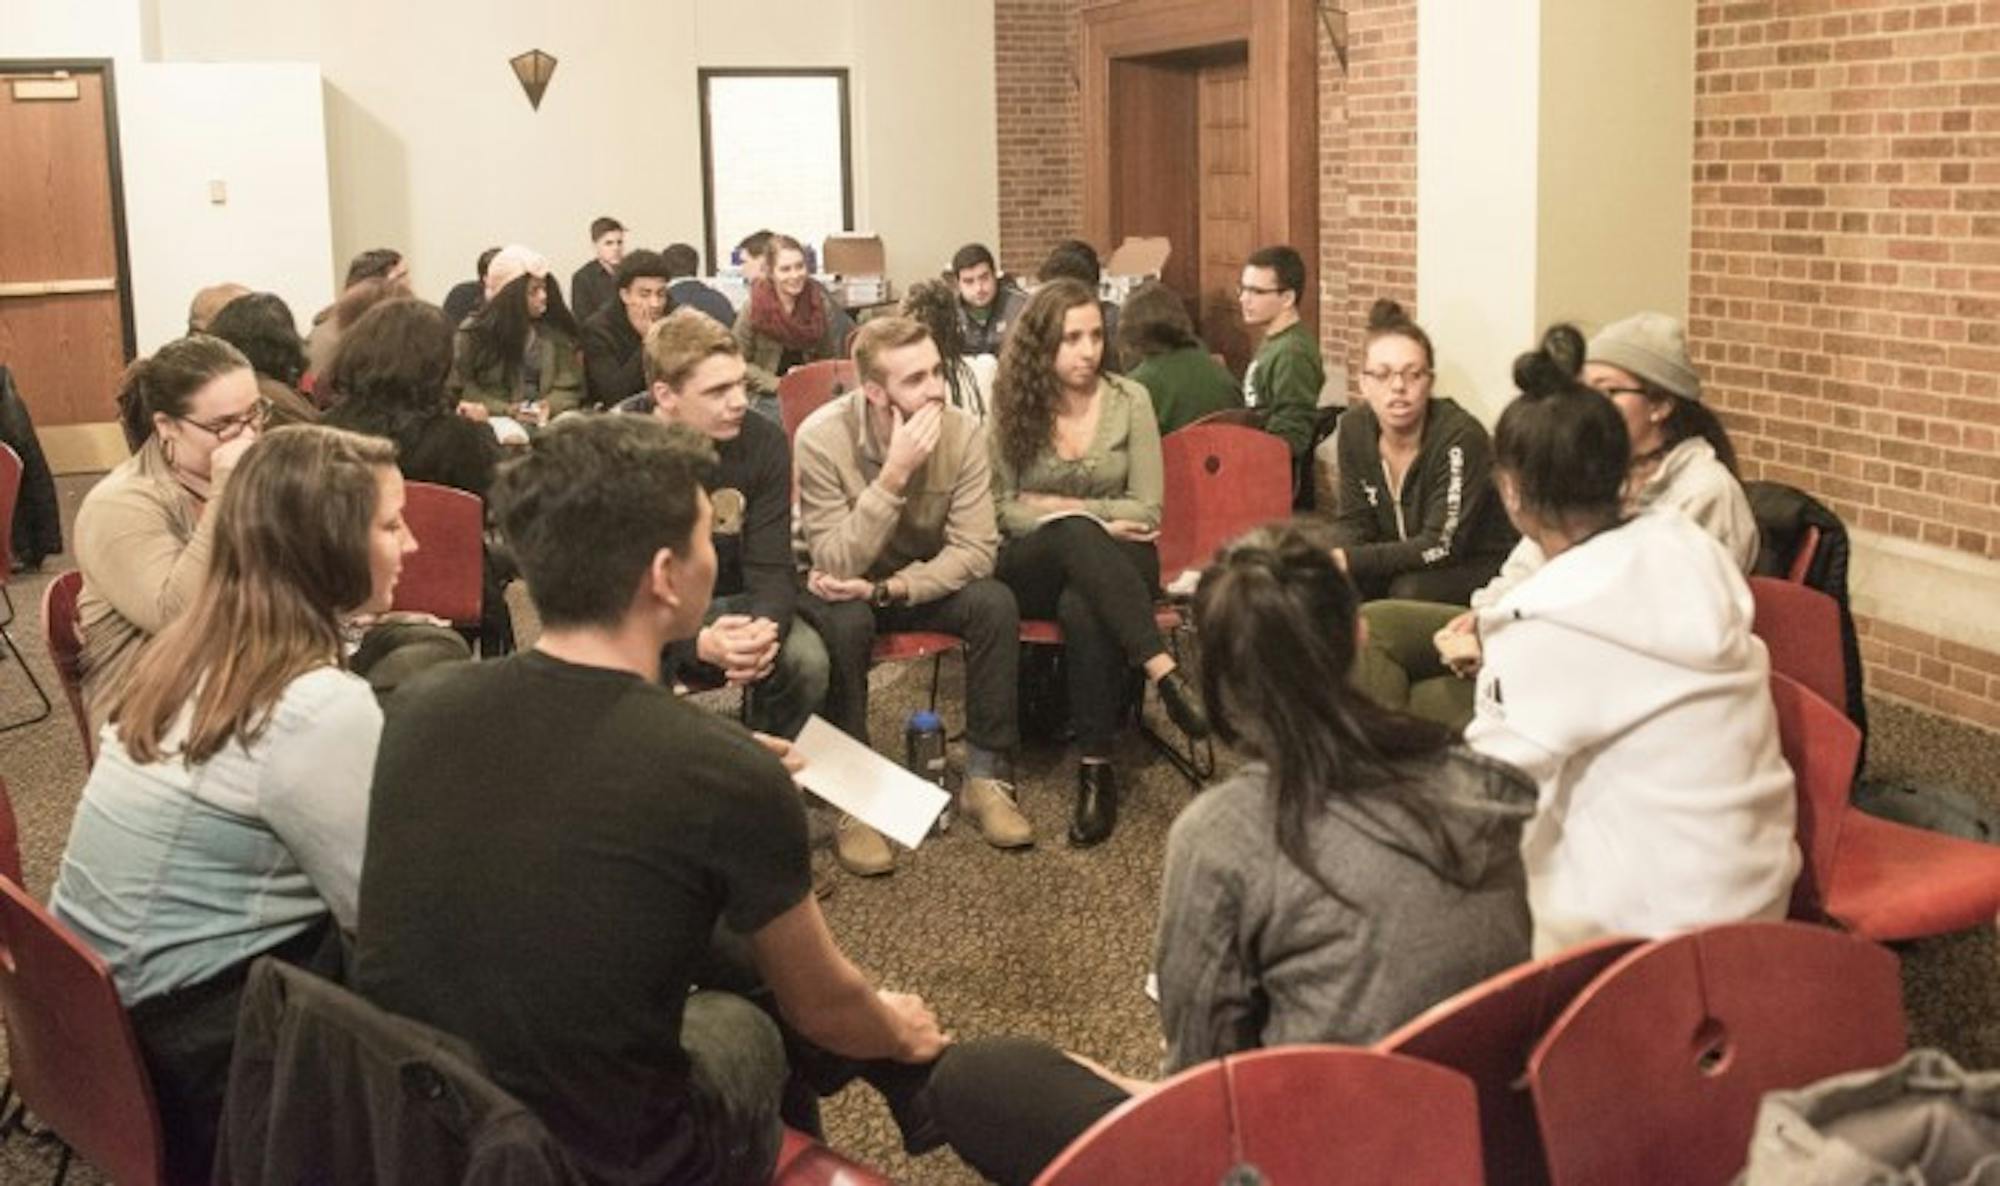 Students participate in group discussions during Tuesday night's forum in the Hospitality Room of South Dining Hall. The forum discussed ways to build a more inclusive Notre Dame community.